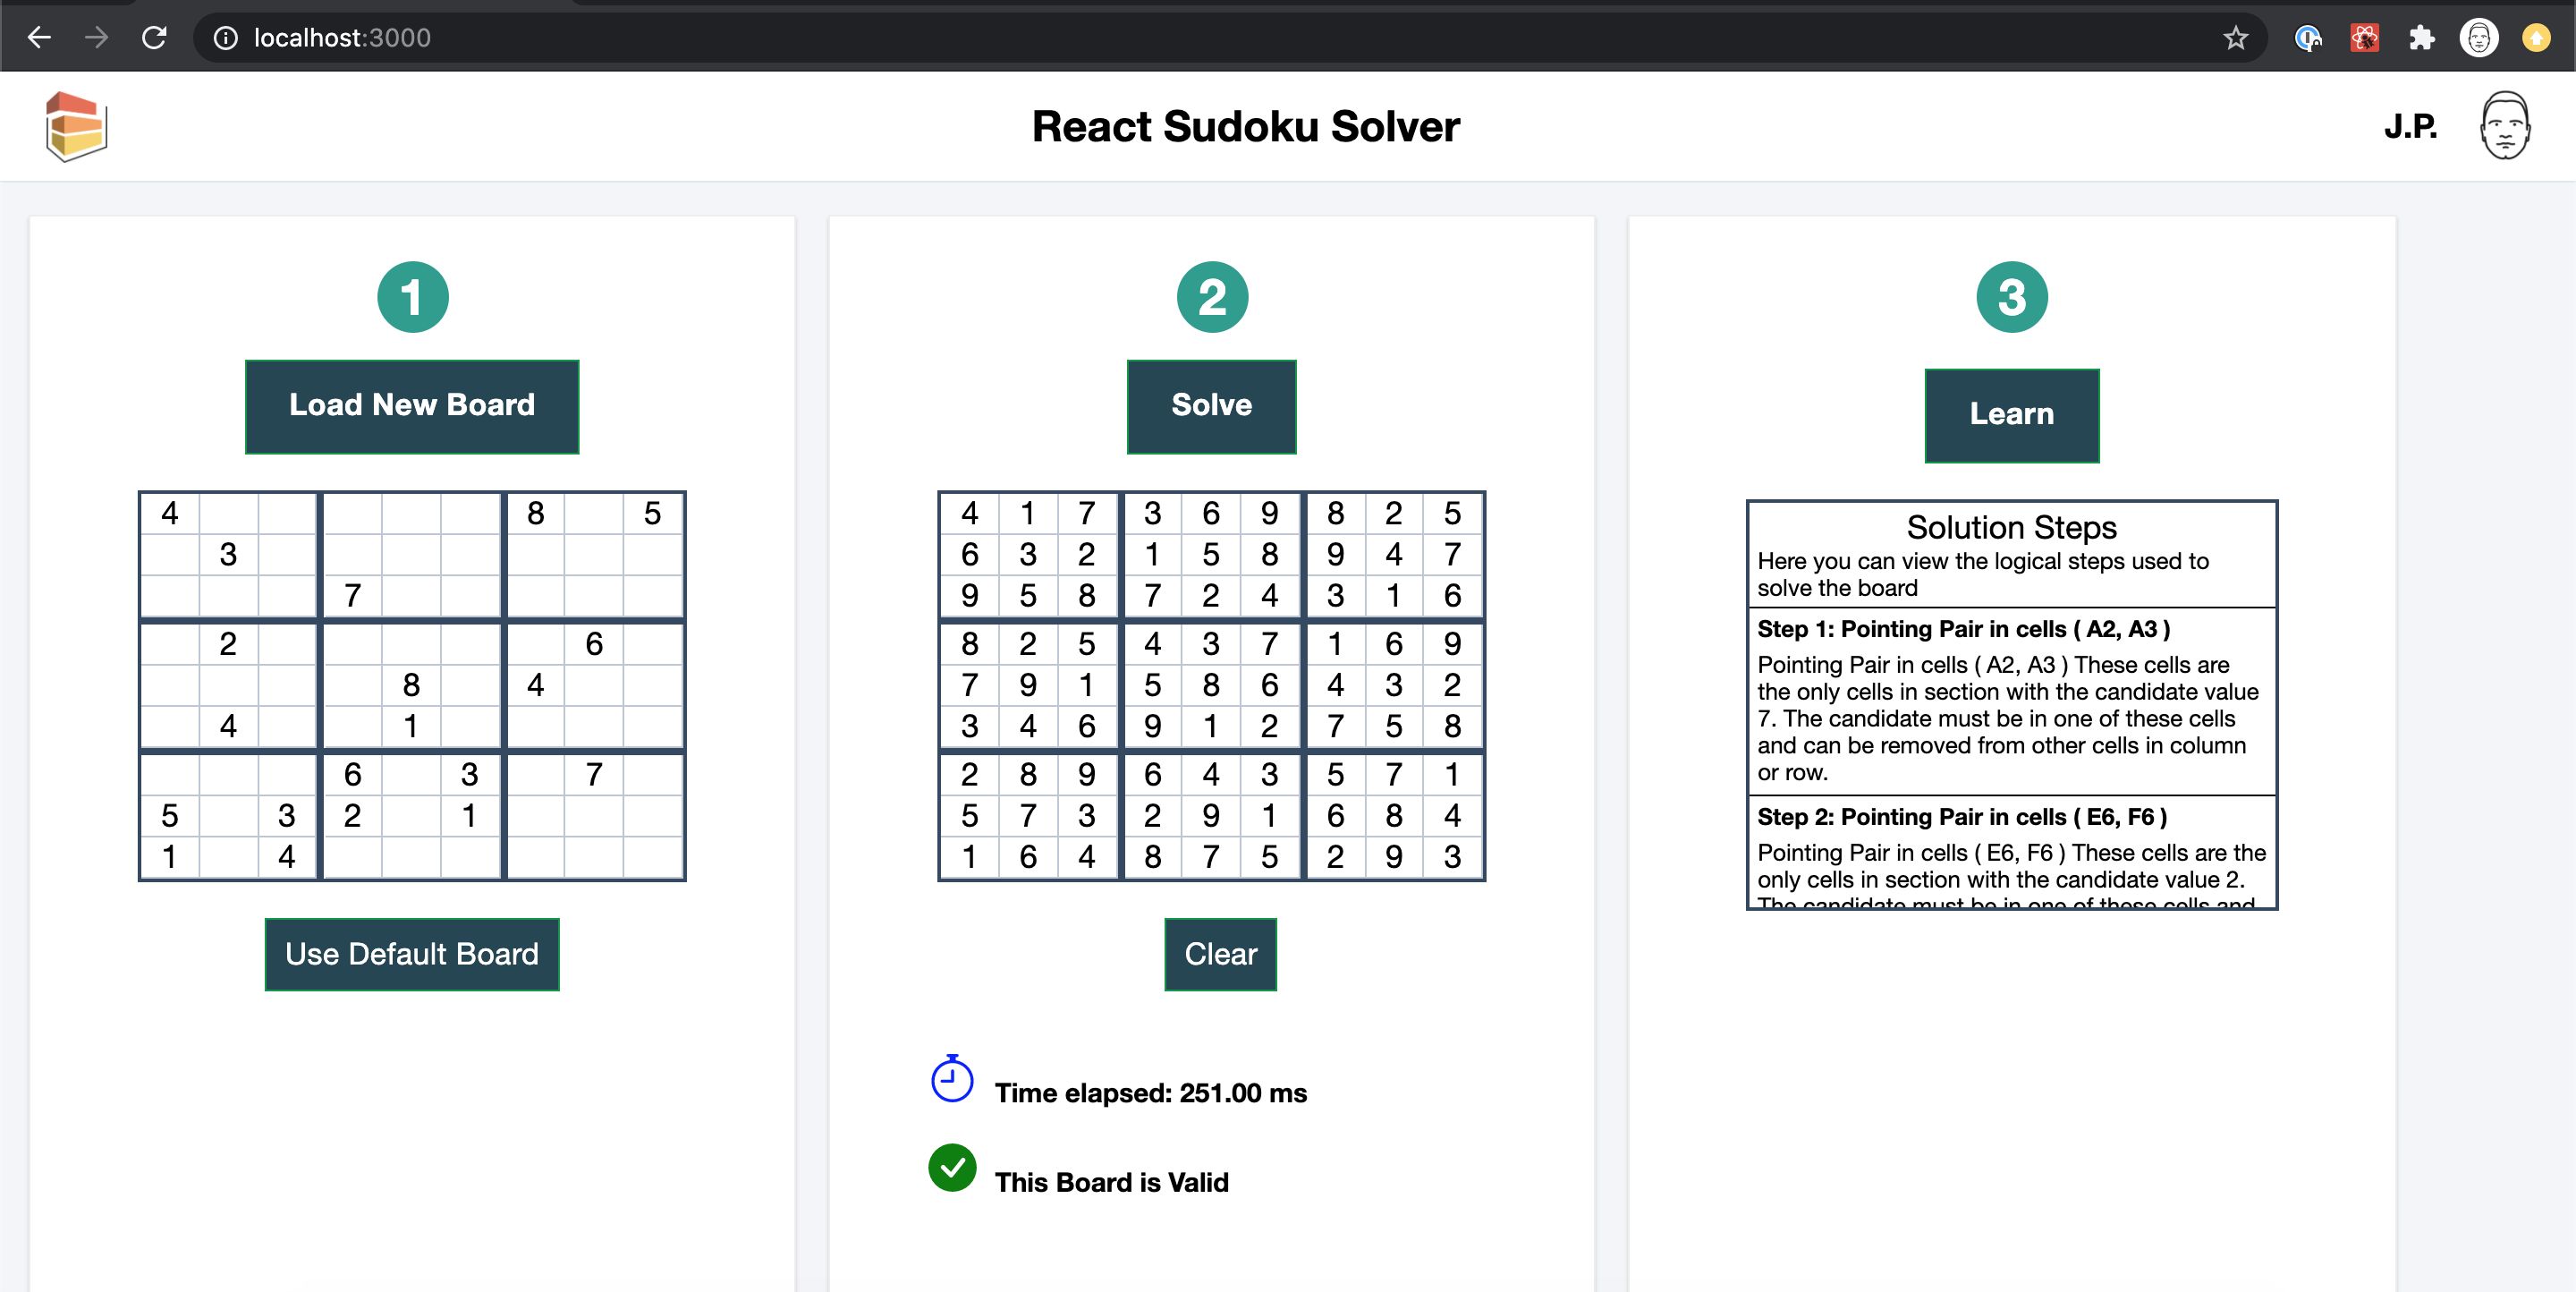 Creating React Application For Solving Every Sudoku Puzzle